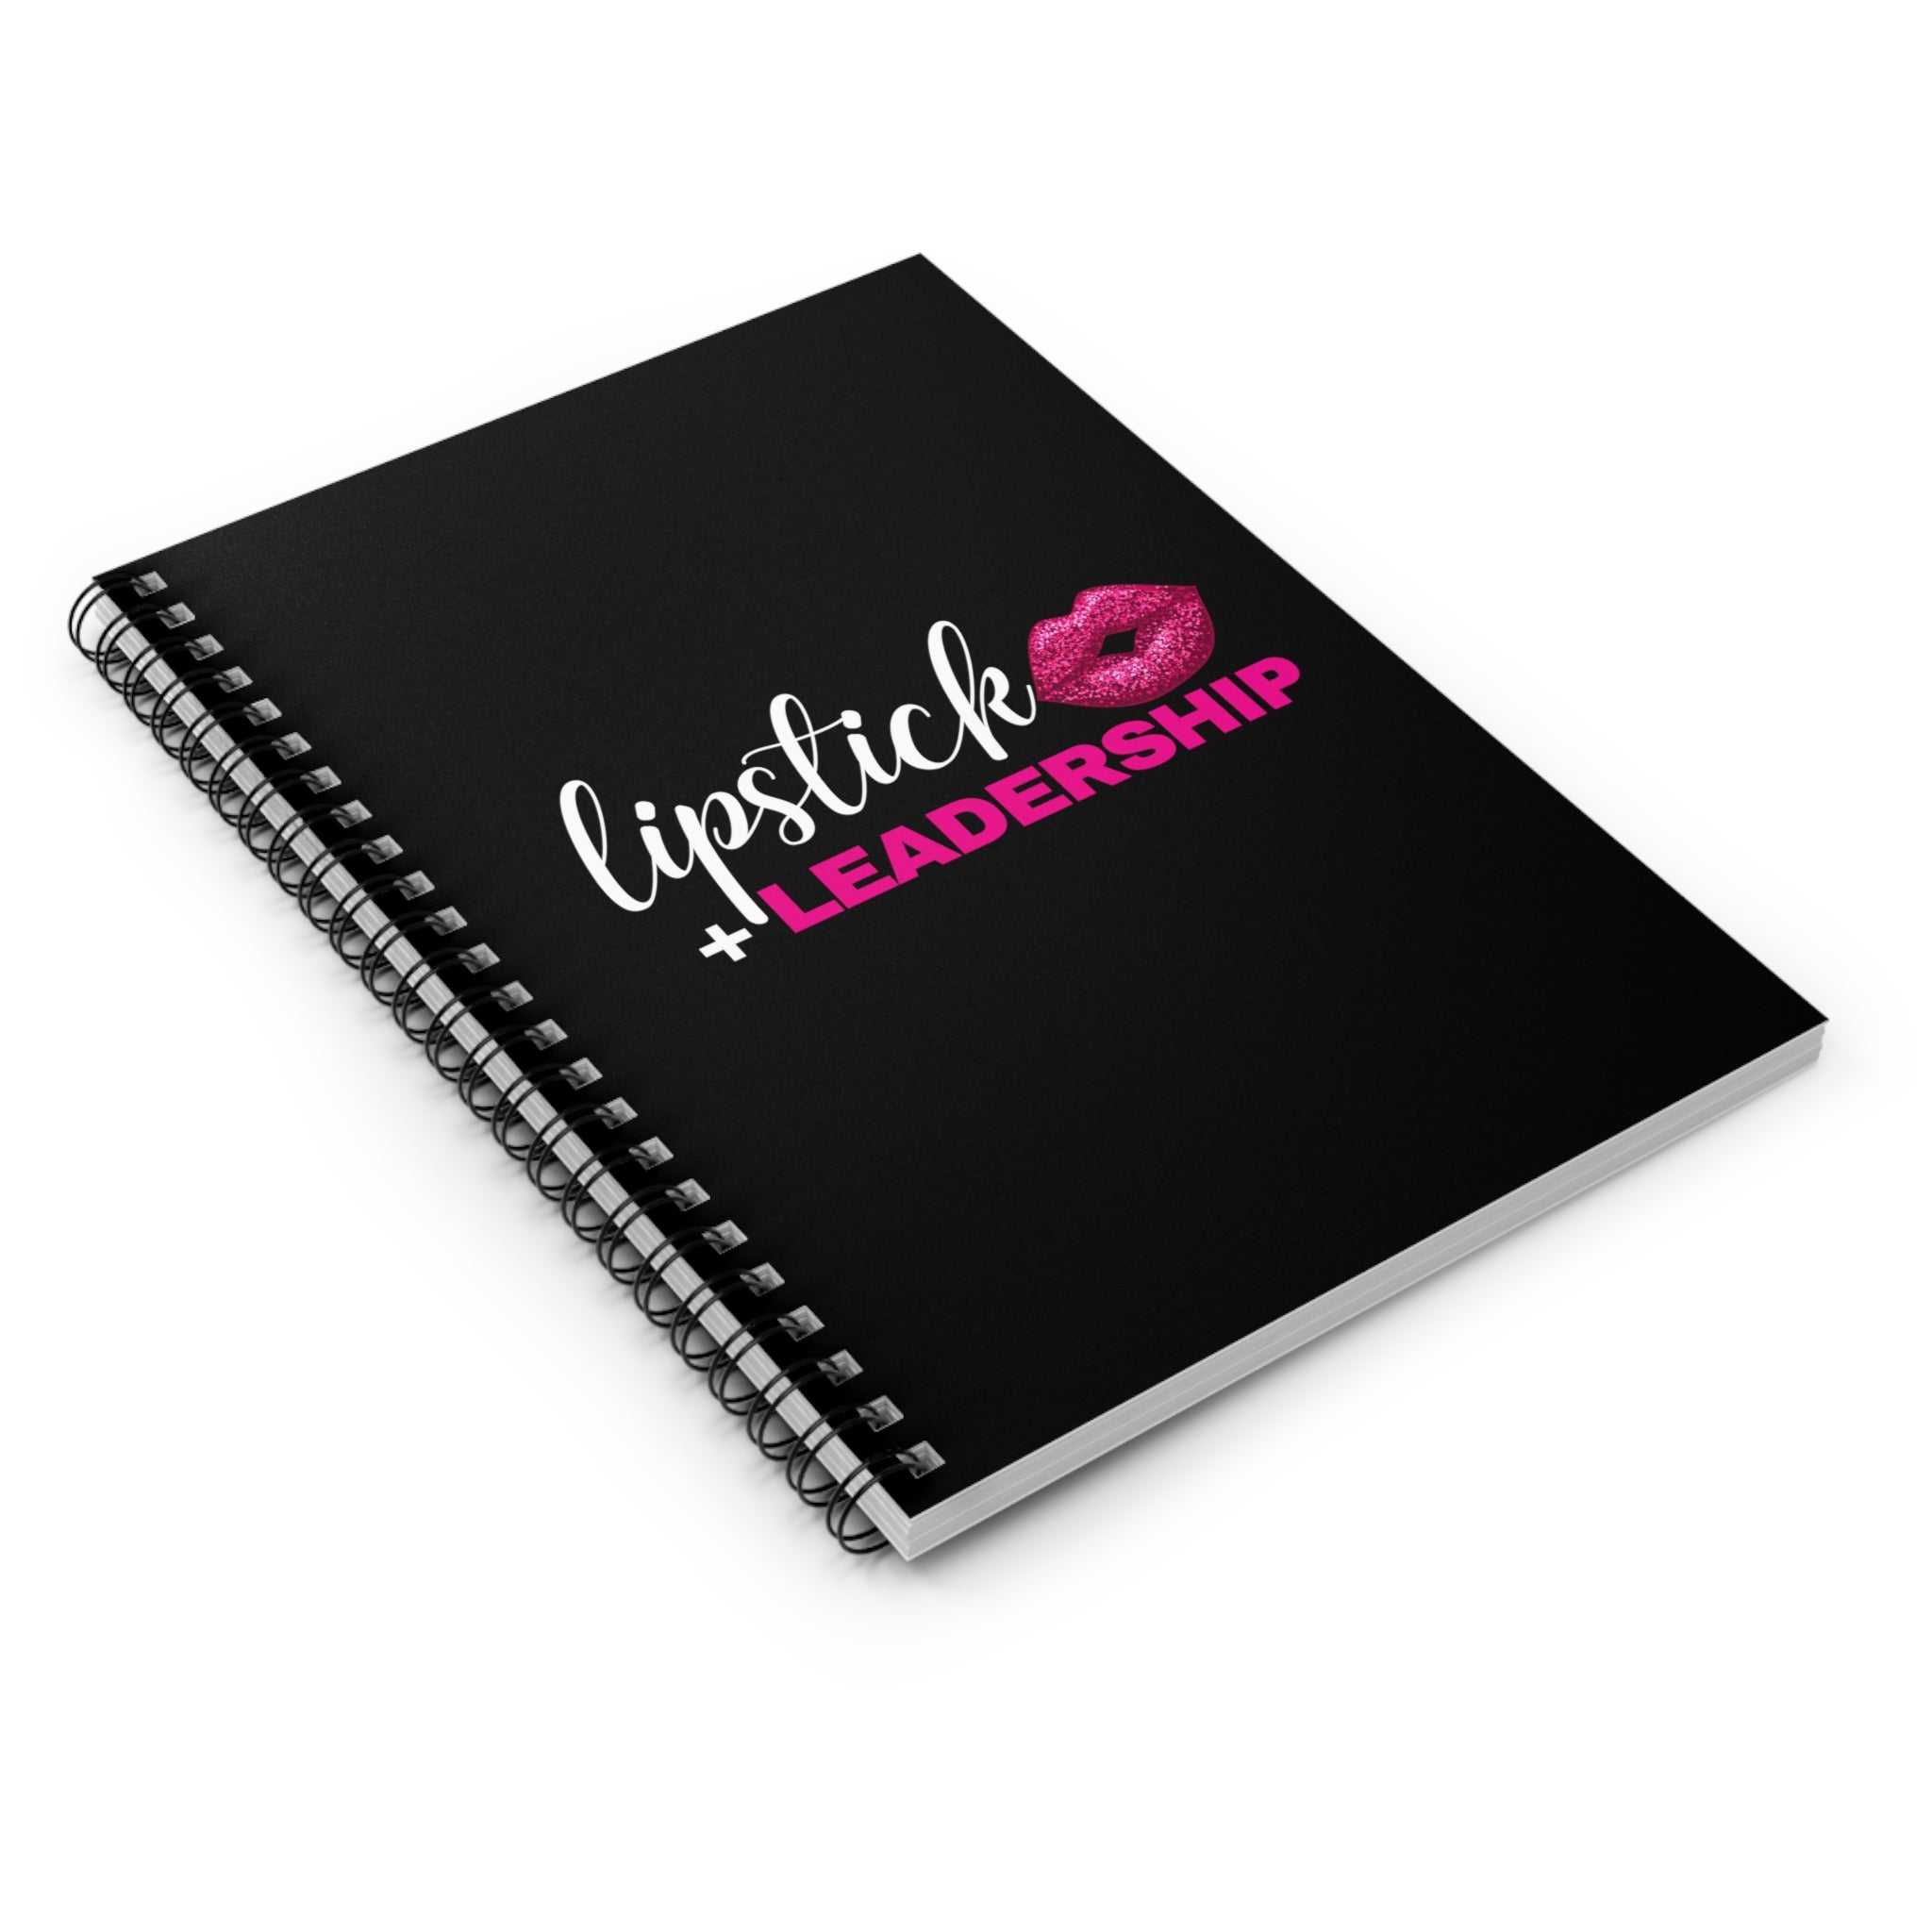 Lipstick + Leadership (Pink Sparkle Lips) Spiral Notebook - Ruled Line, Makeup Journal, Beauty Business Notebook Paper products  The Middle Aged Groove